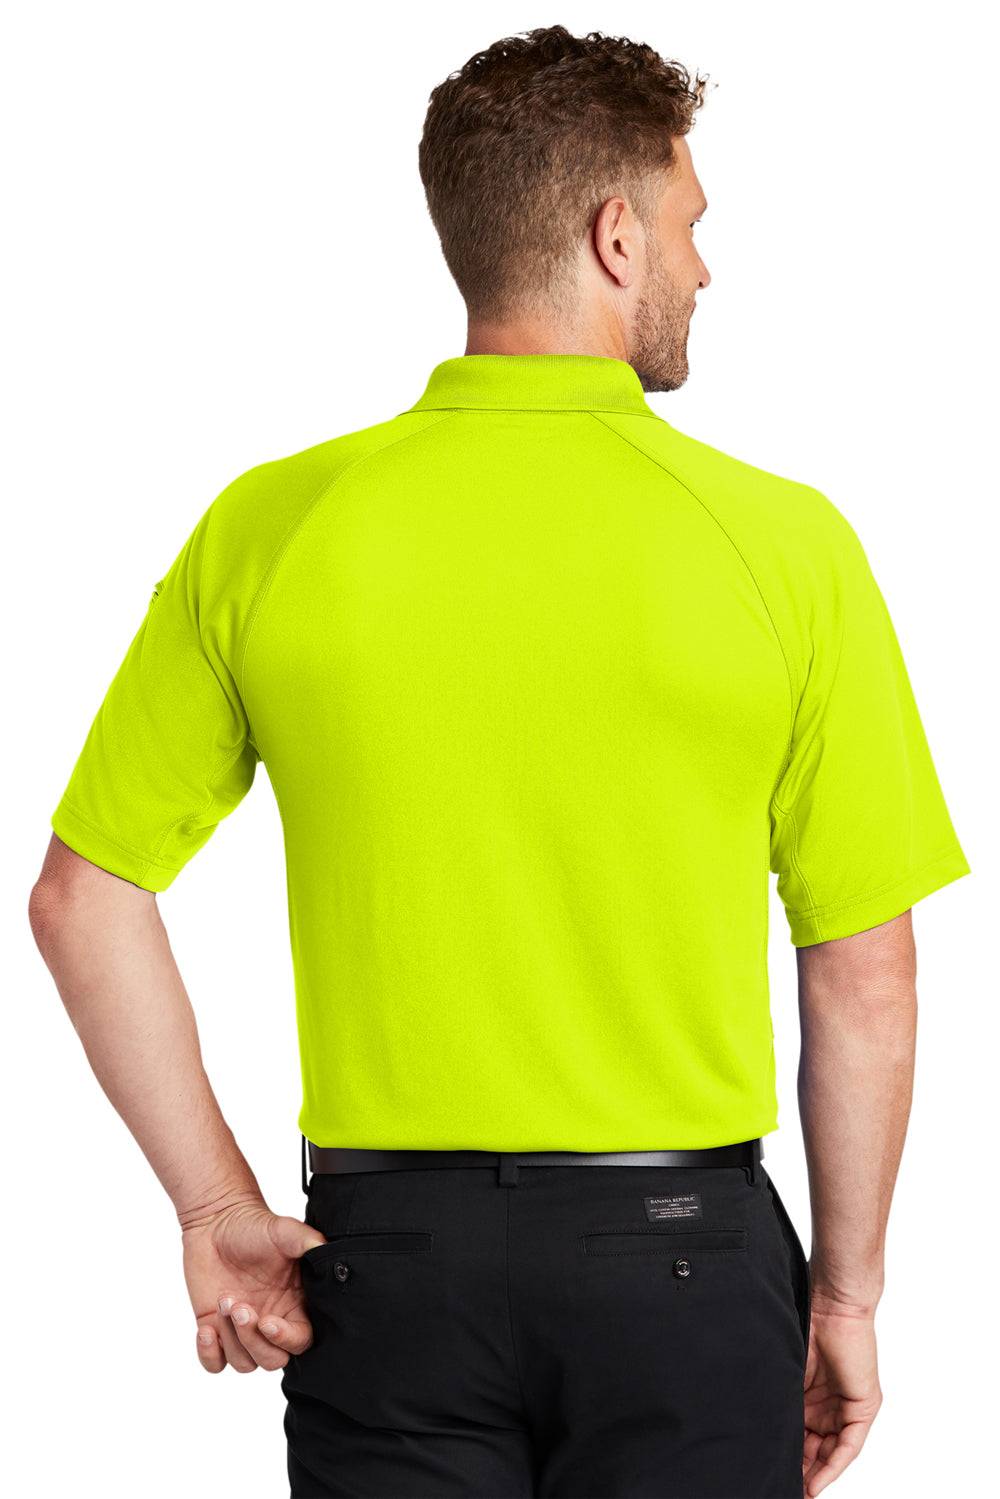 CornerStone CS420 Mens Select Tactical Moisture Wicking Short Sleeve Polo Shirt Safety Yellow Back